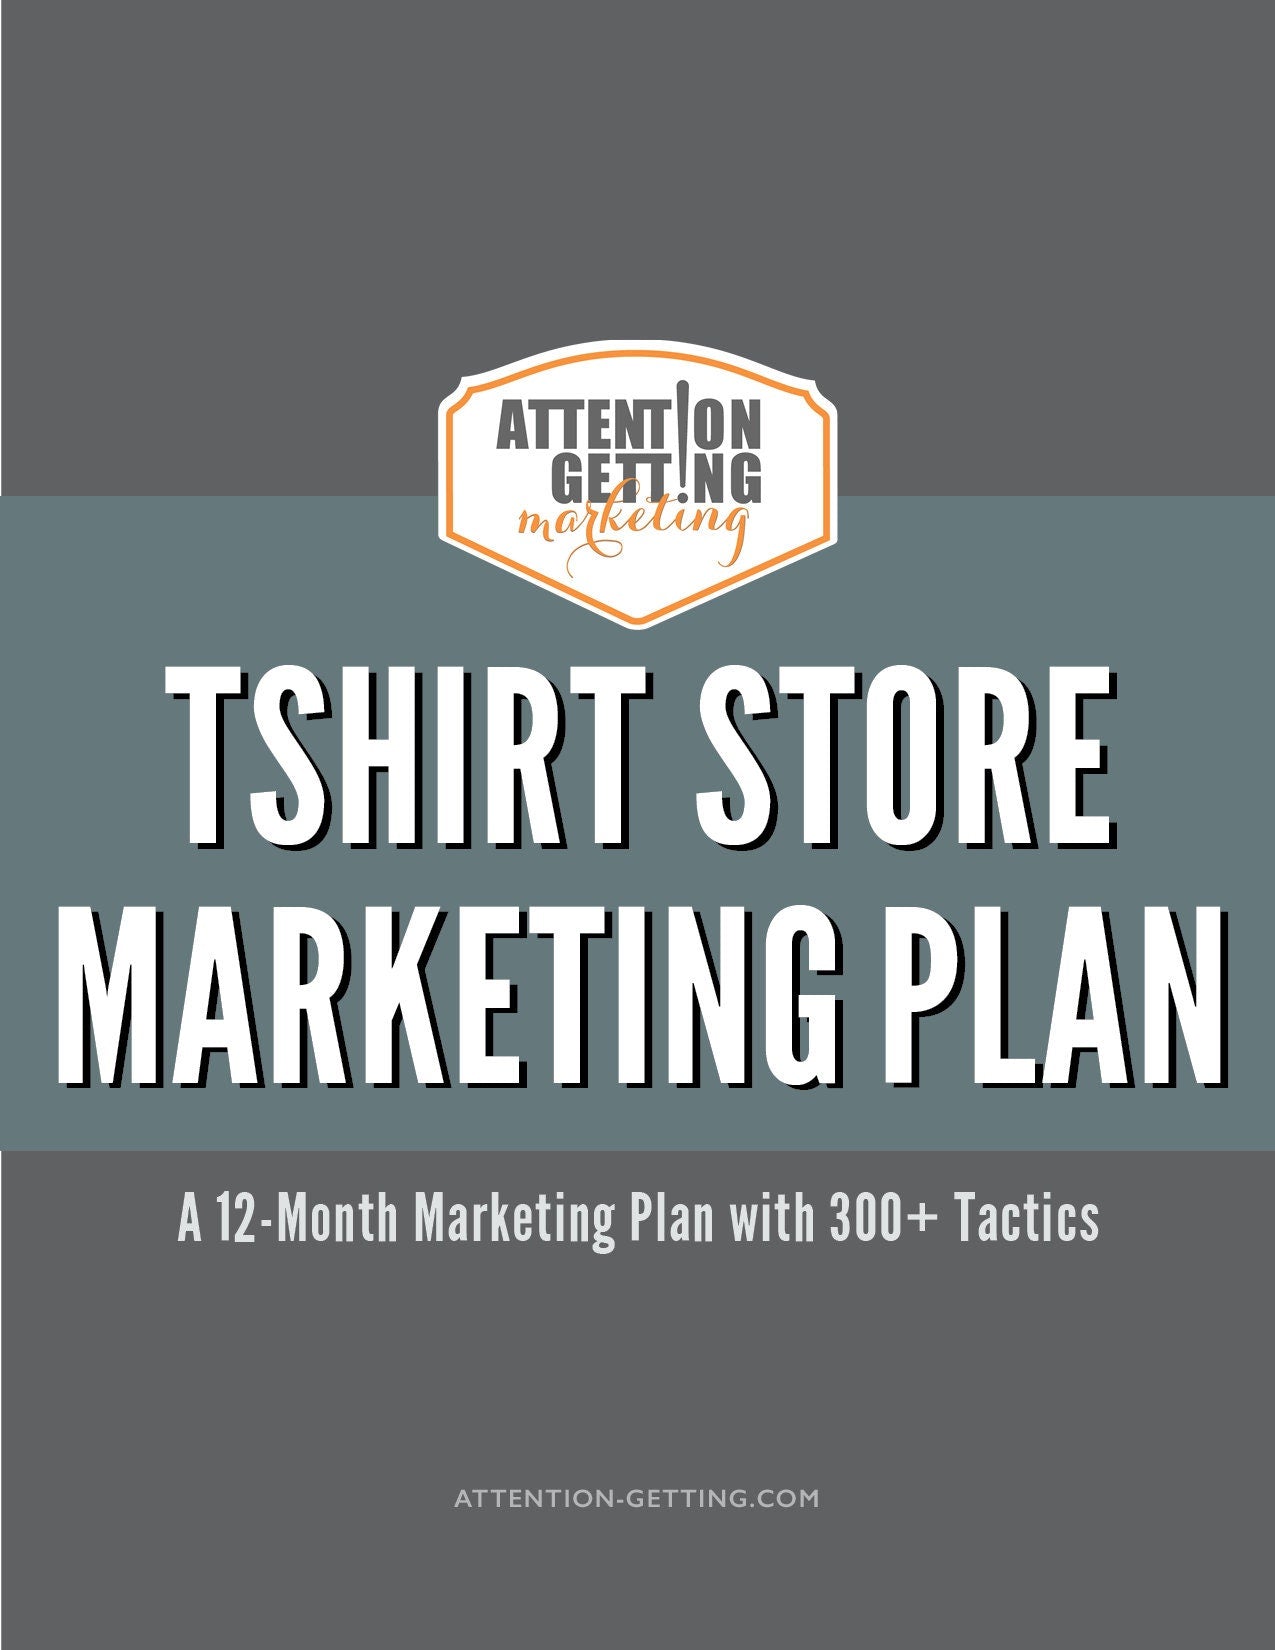 t shirt 12 month marketing strategy plans with social media ideas for sellers on etsy amazon online print fulfillment